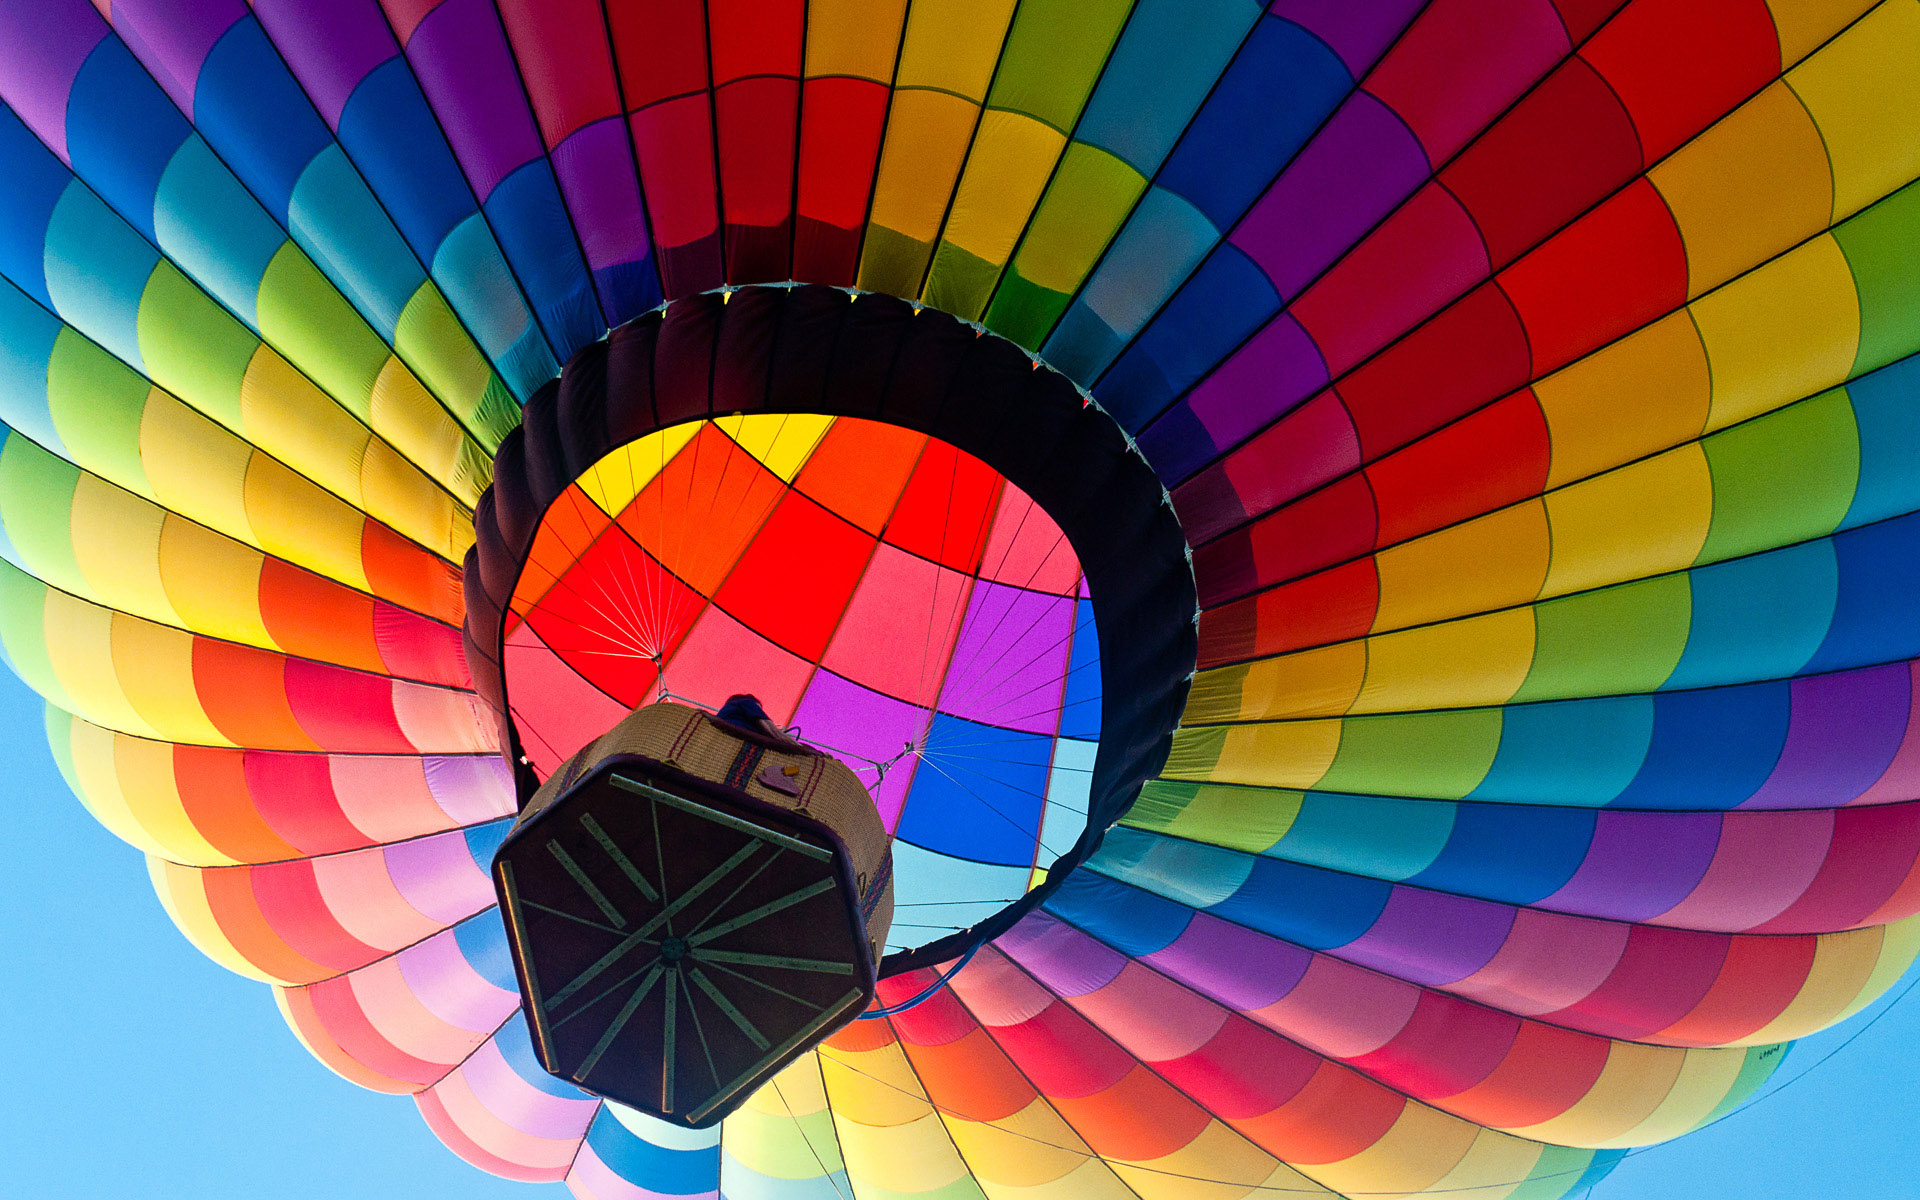  19 2015 By Stephen Comments Off on Hot Air Balloons Wallpapers